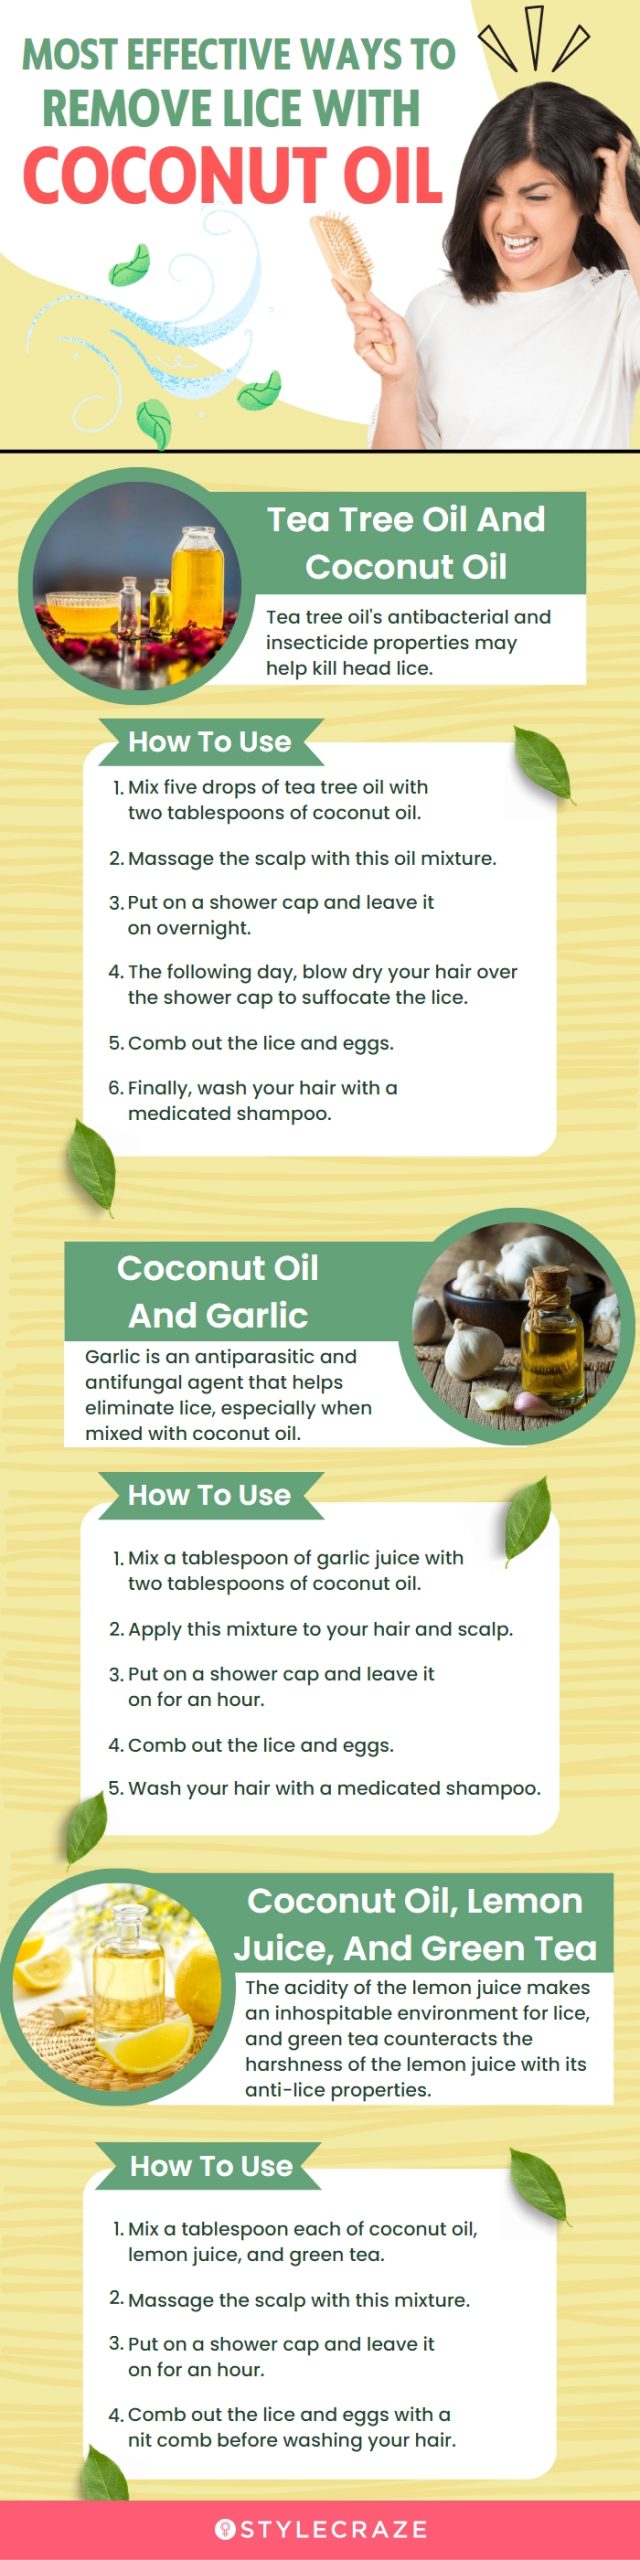 most effective ways to remove lice with coconut oil (infographic)